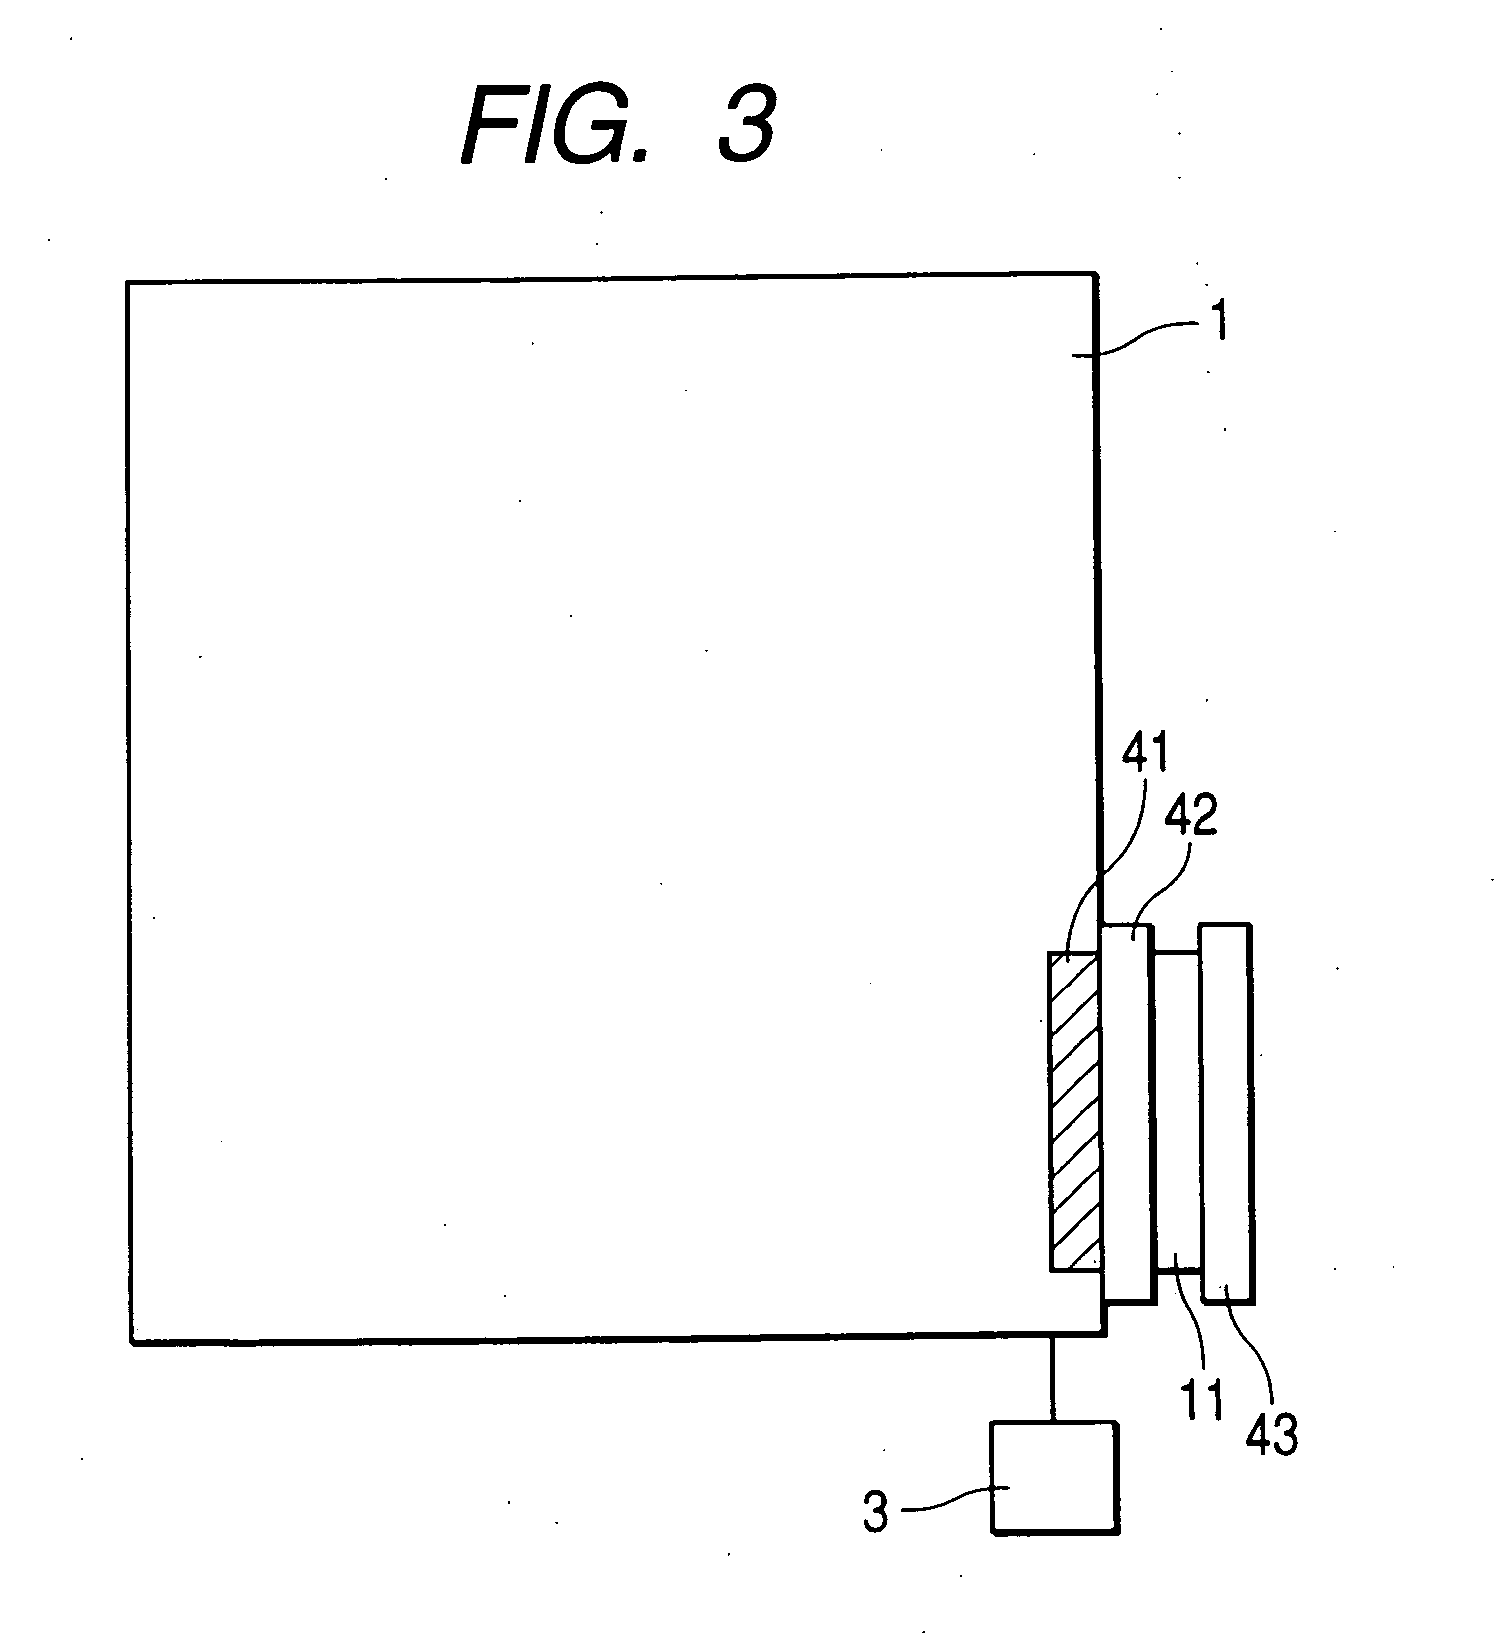 Fuel cell system for an automotive vehicle